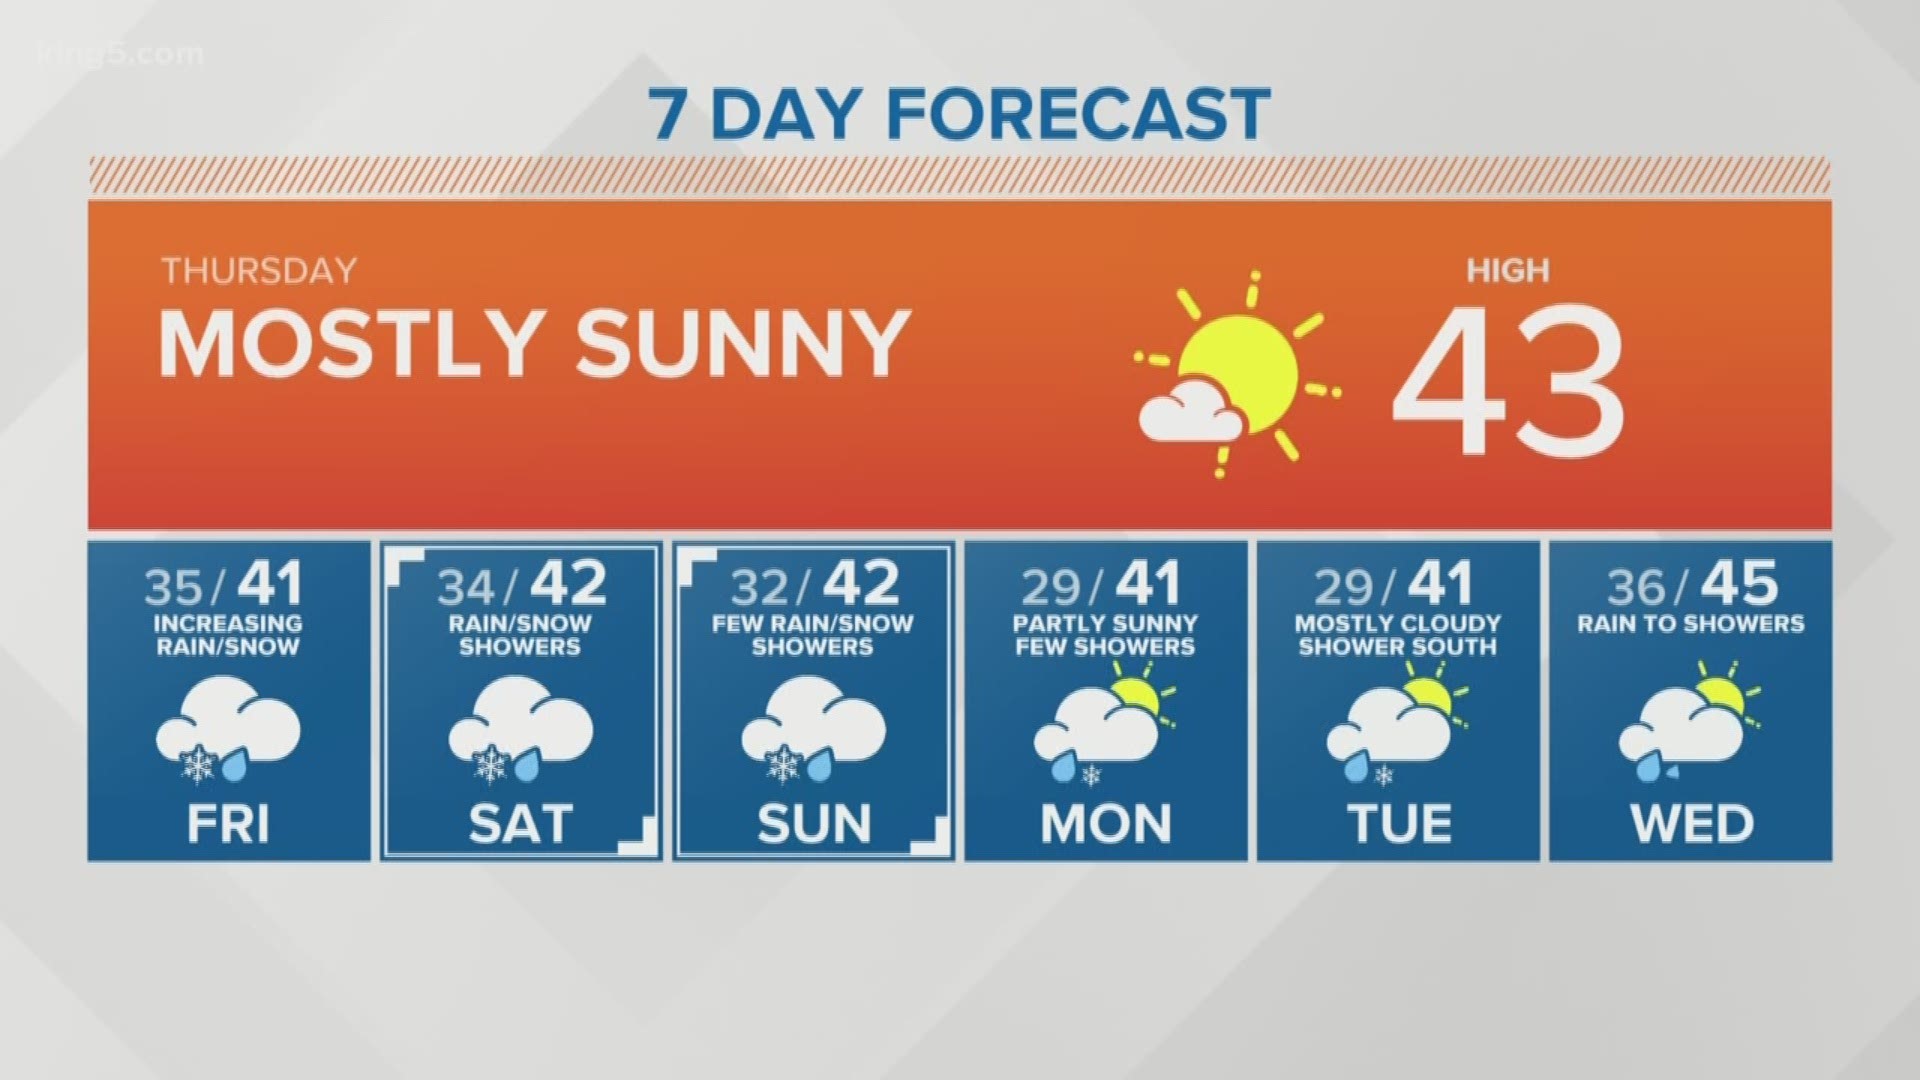 2-21-19 morning forecast with KING 5 Meteorologist Rich Marriott